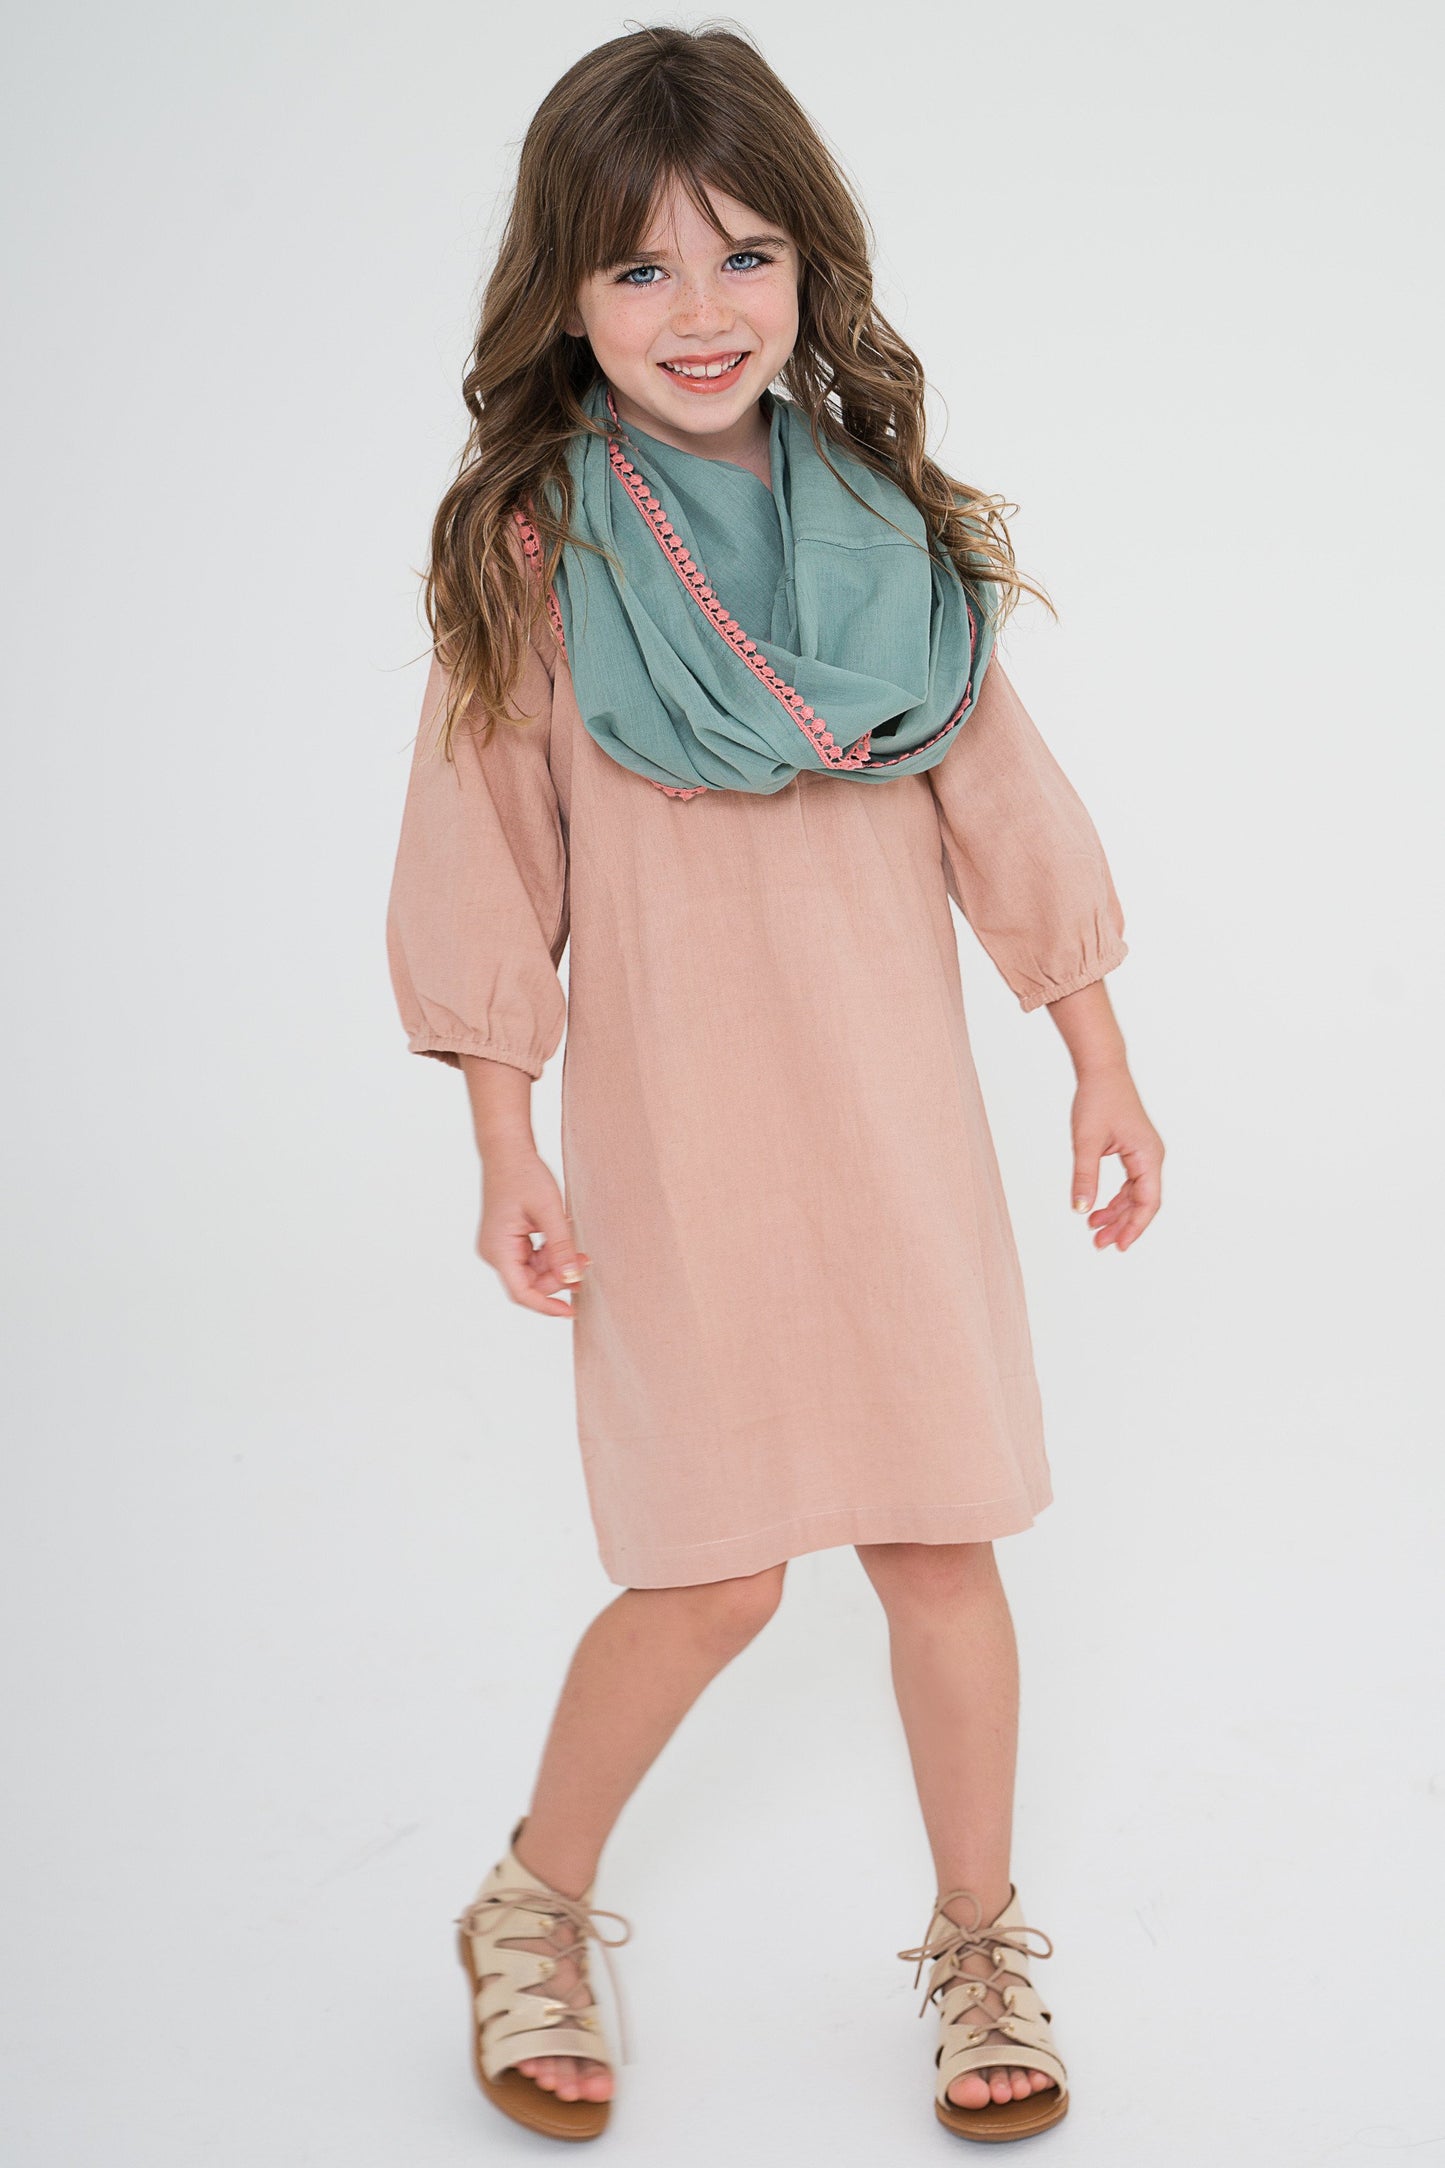 Blush Dress With Teal Infinity Scarf 2-pc. Set